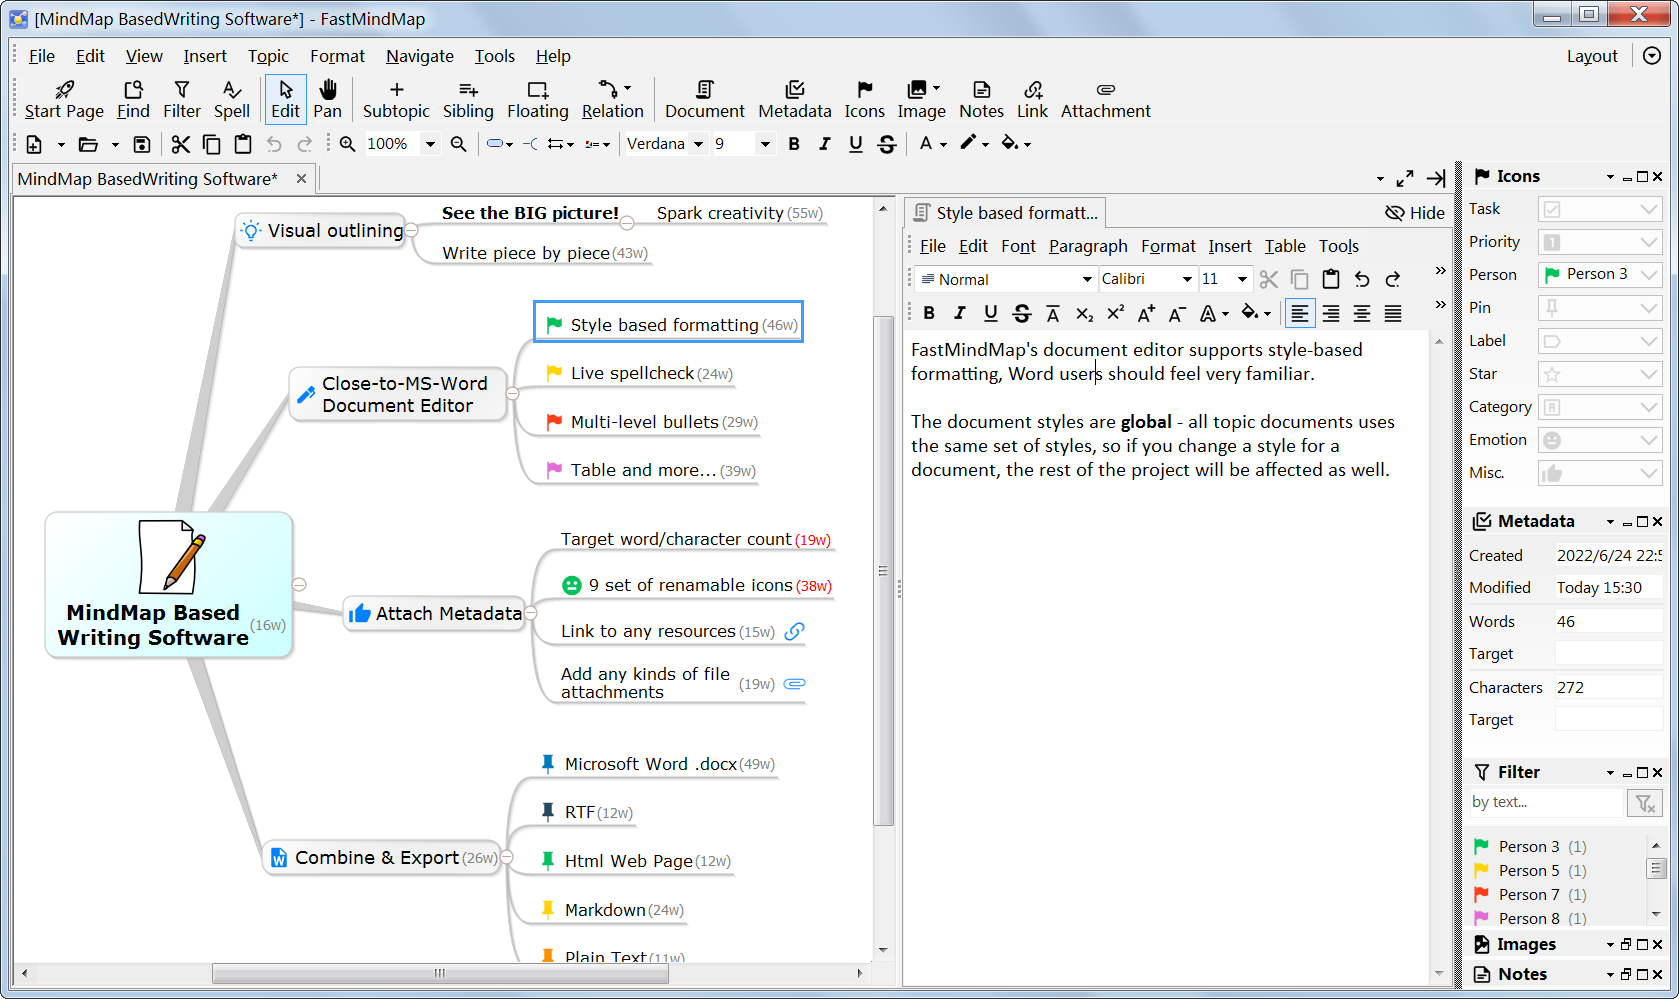 mindmapping based authoring/writing software for Windows